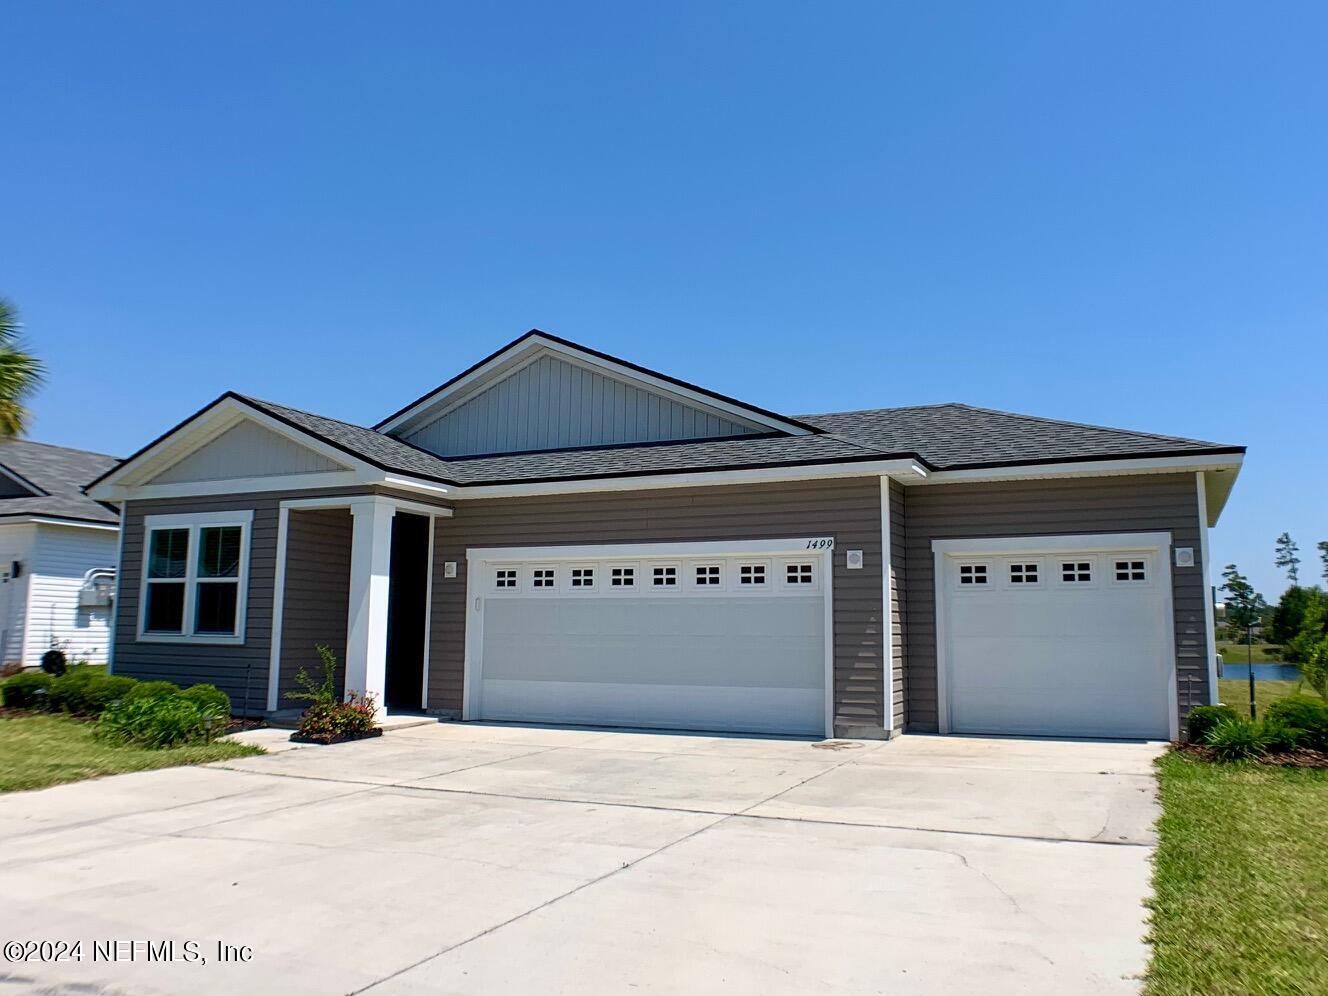 Middleburg, FL home for sale located at 1499 Tropical Pine Cove, Middleburg, FL 32068